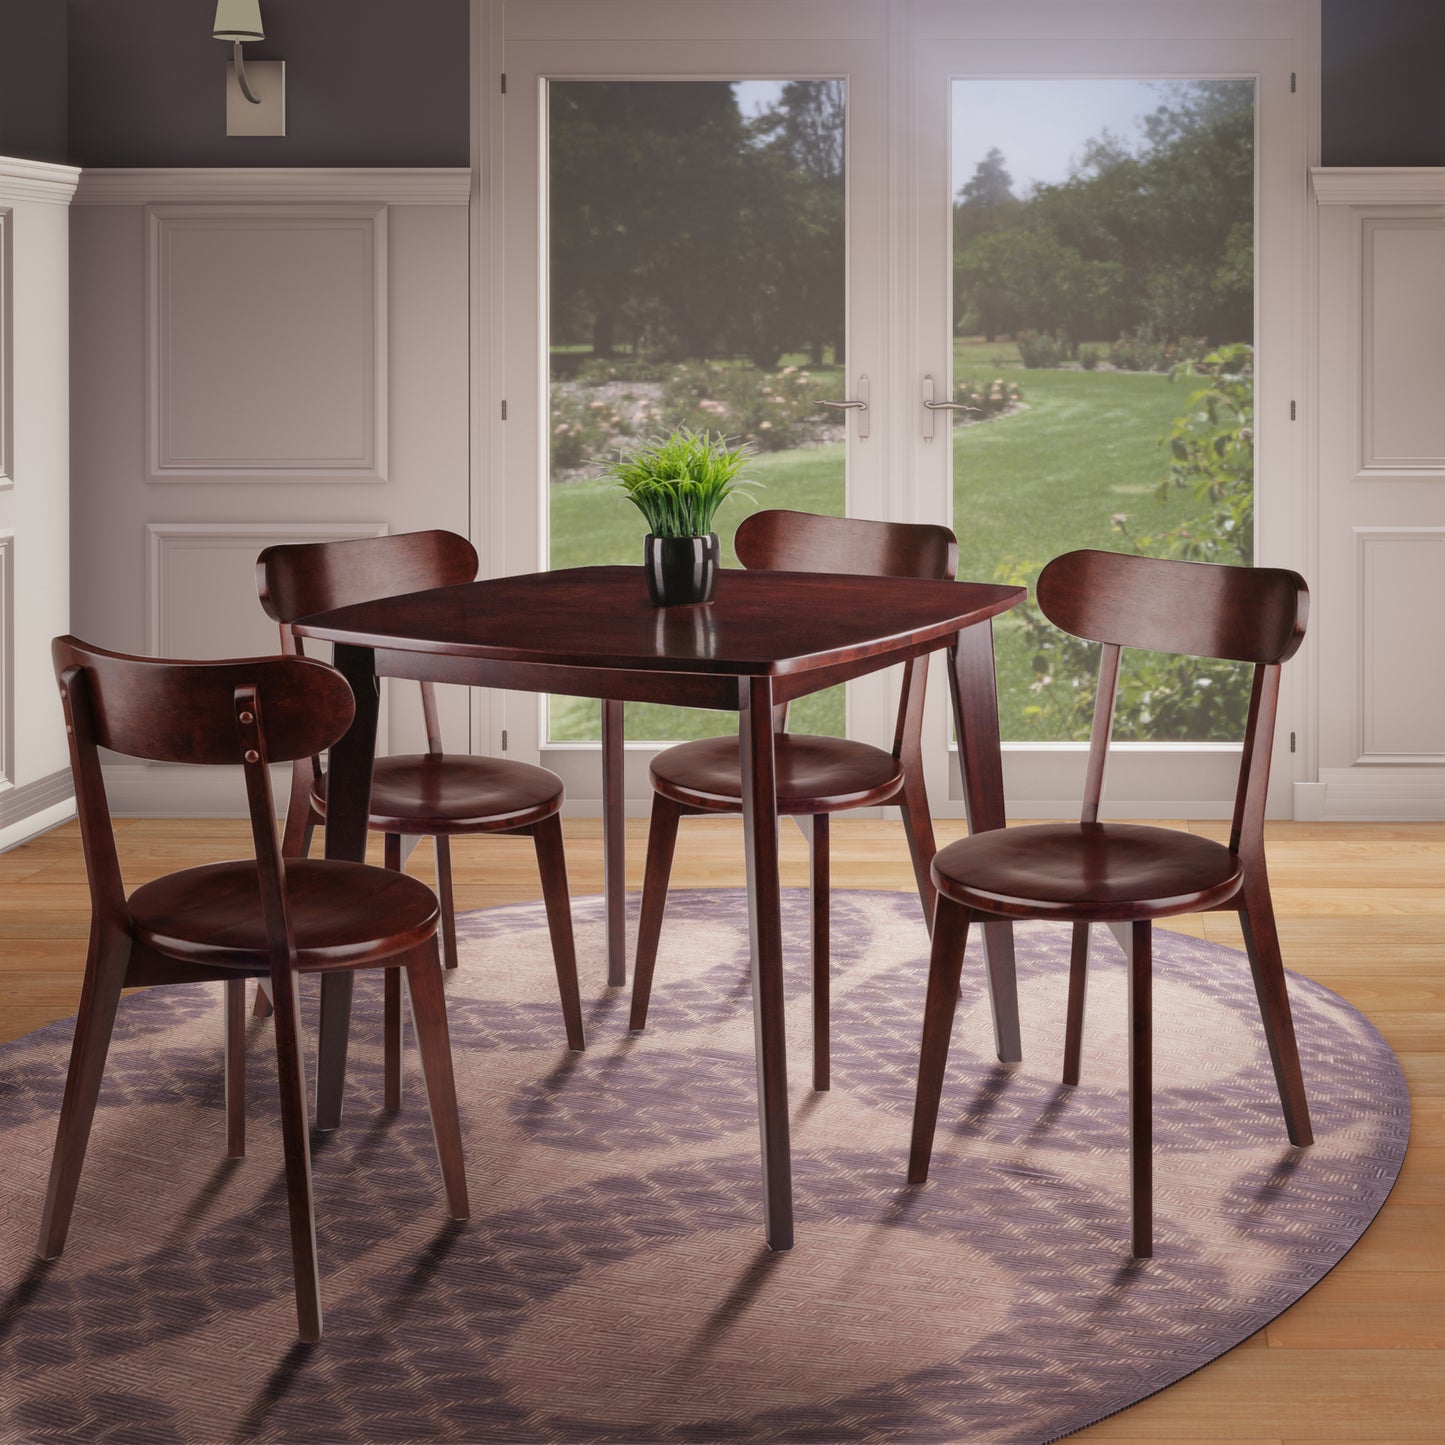 Pauline 5-Pc Dining Table with H-Leg Chairs, Walnut